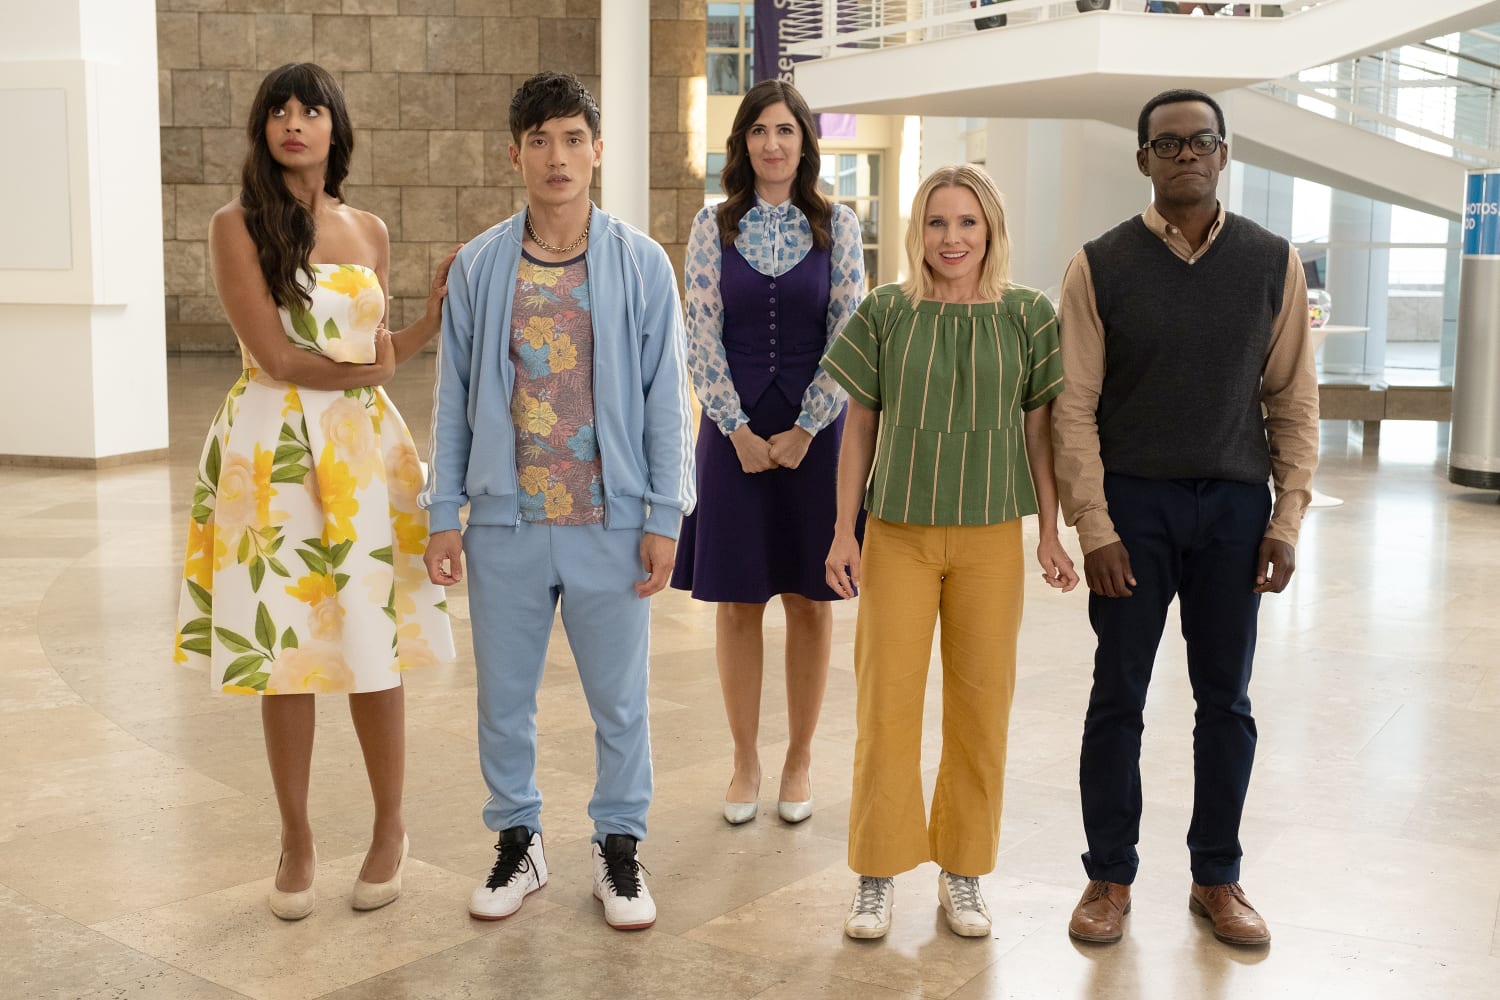 The Getty Center Is So Serenely Beautiful That It Was Literally Heaven on the Hit TV Show 'The Good Place'